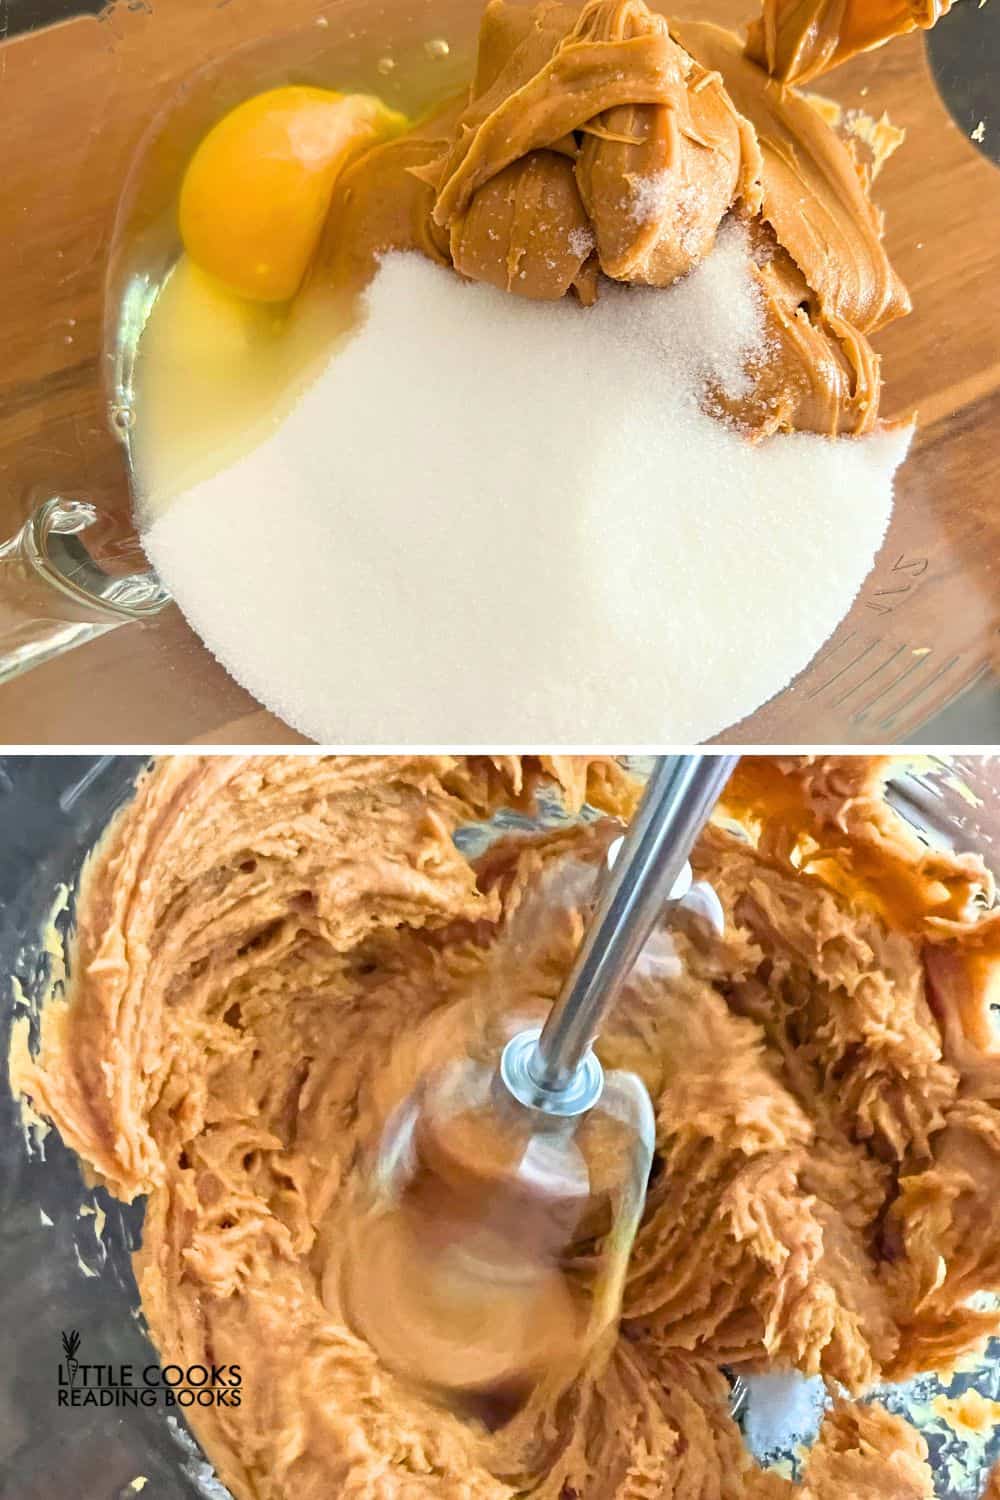 Ingredients In Three Ingredient Peanut Butter Cookies in a bowl and also a picture of peanut butter cookie recipe ingredients being mixed with a mixer